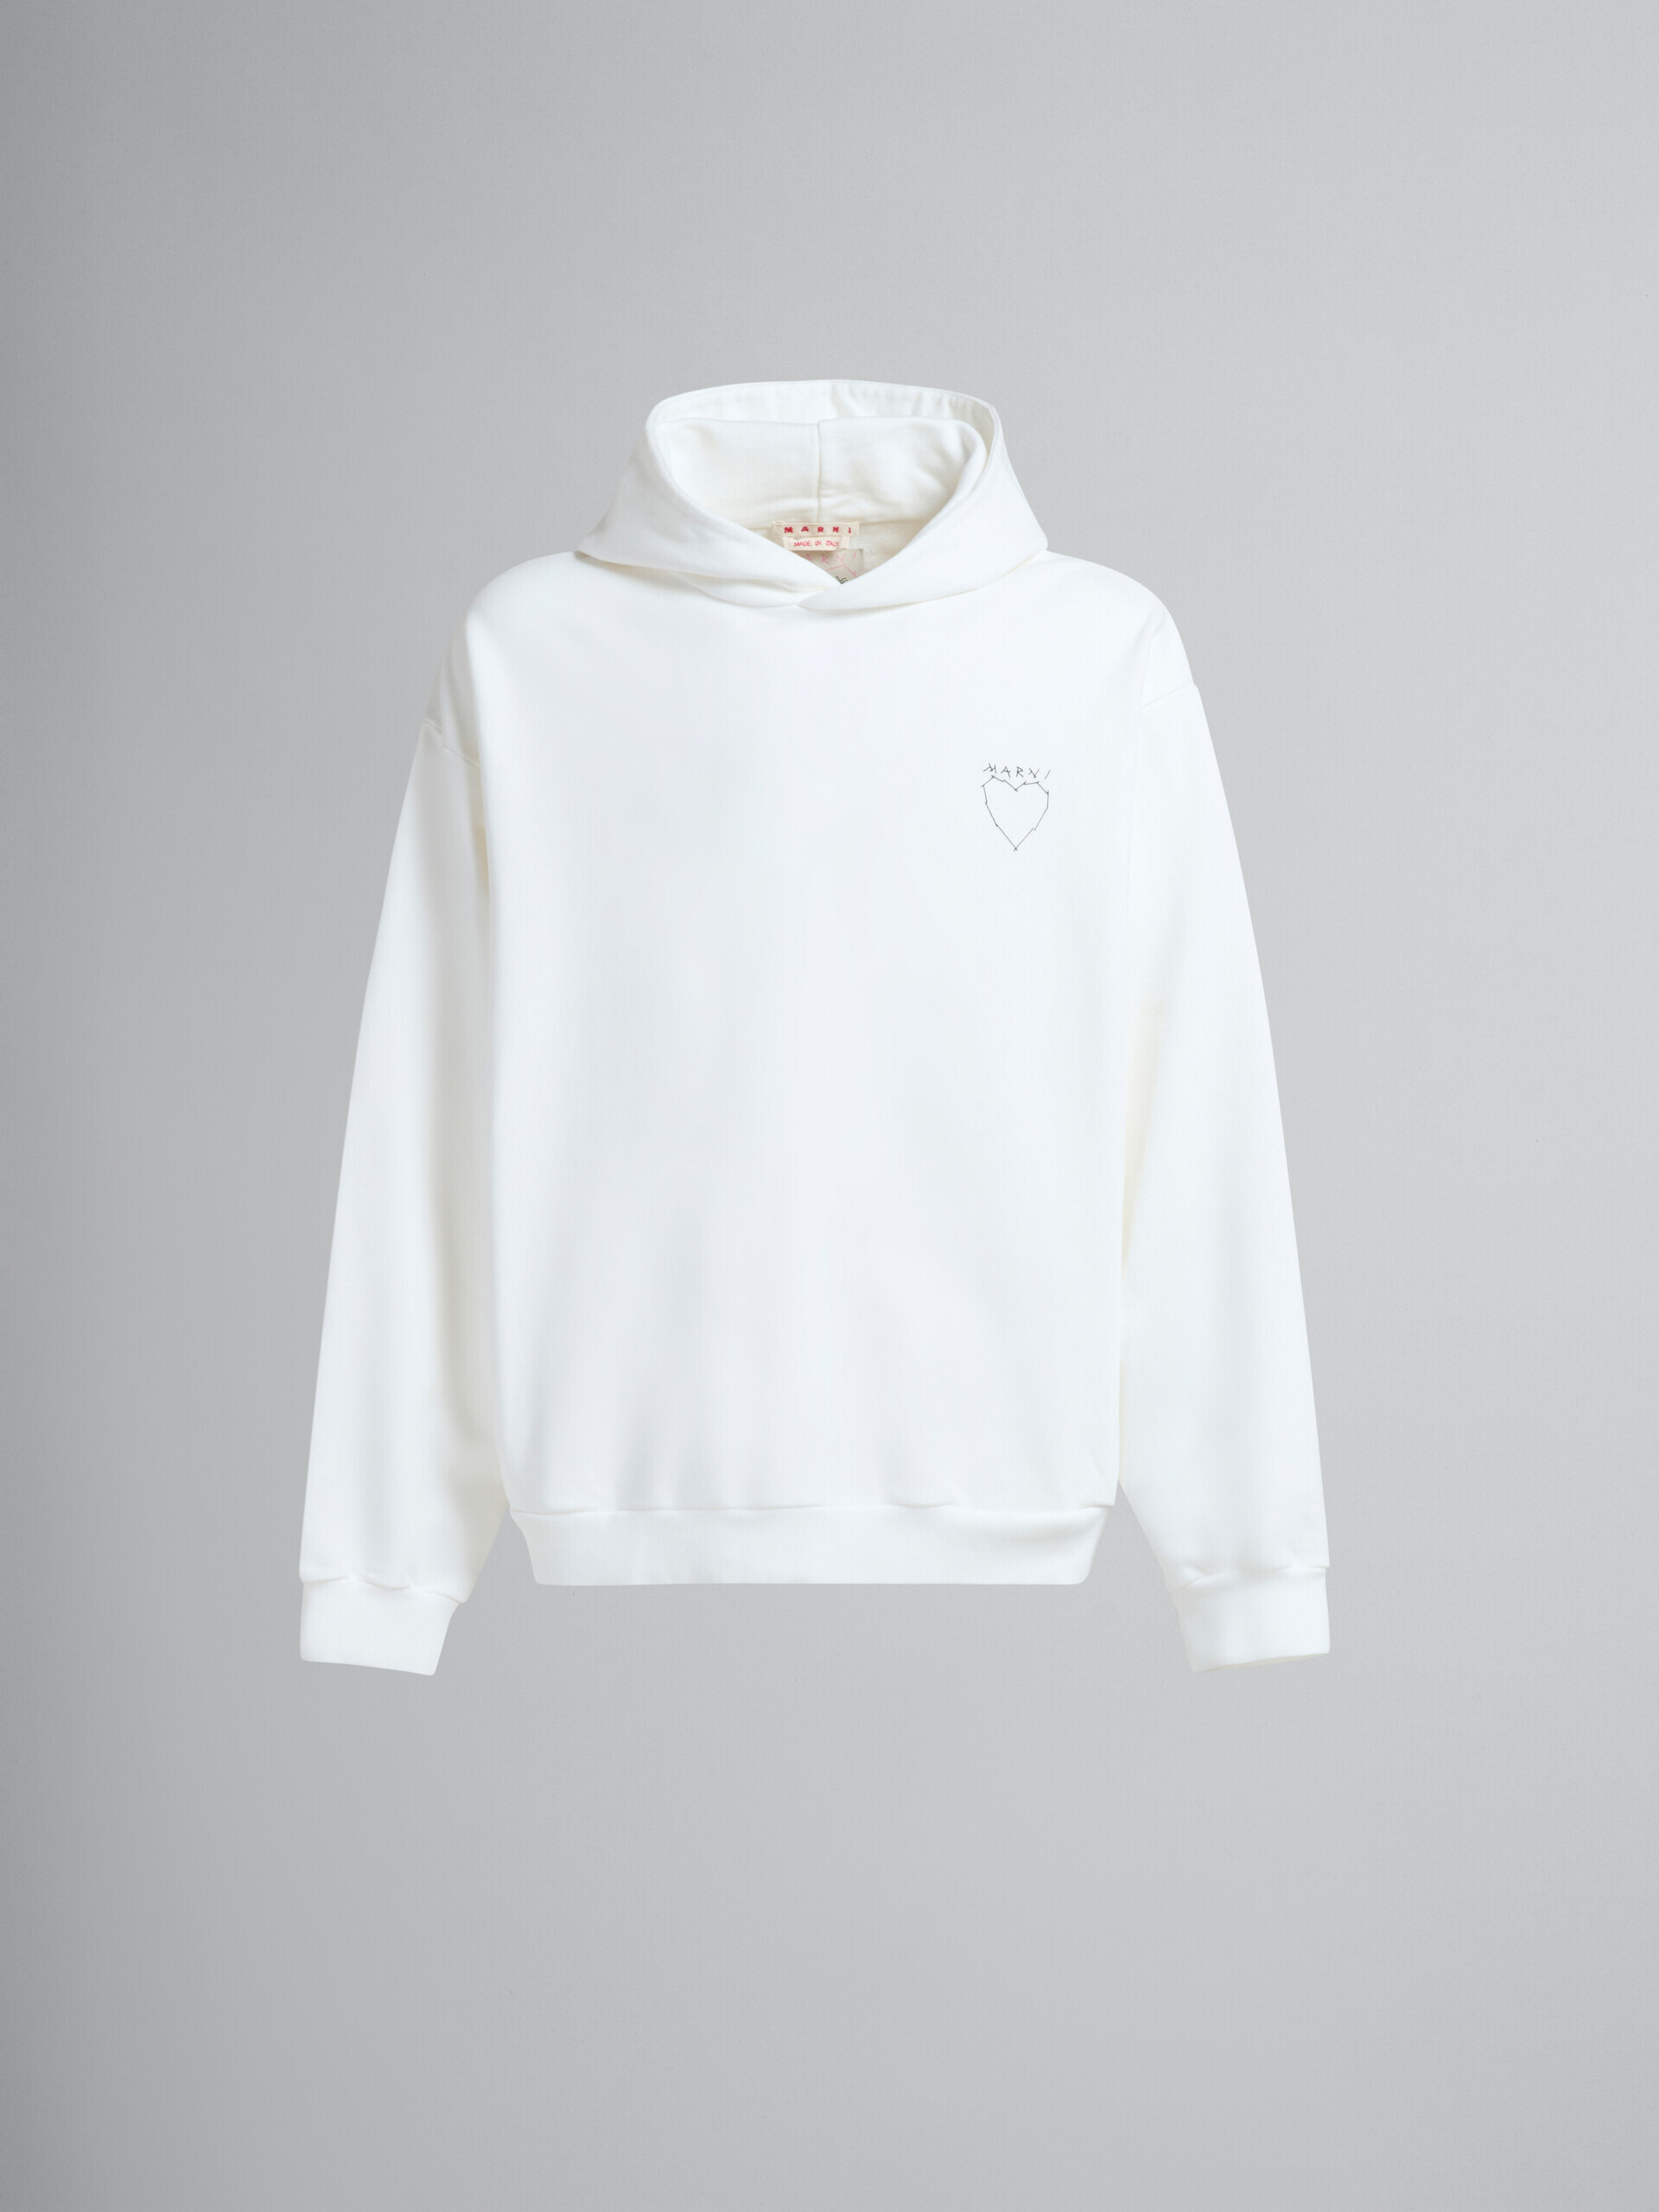 White organic jersey hoodie with back print - Sweaters - Image 2